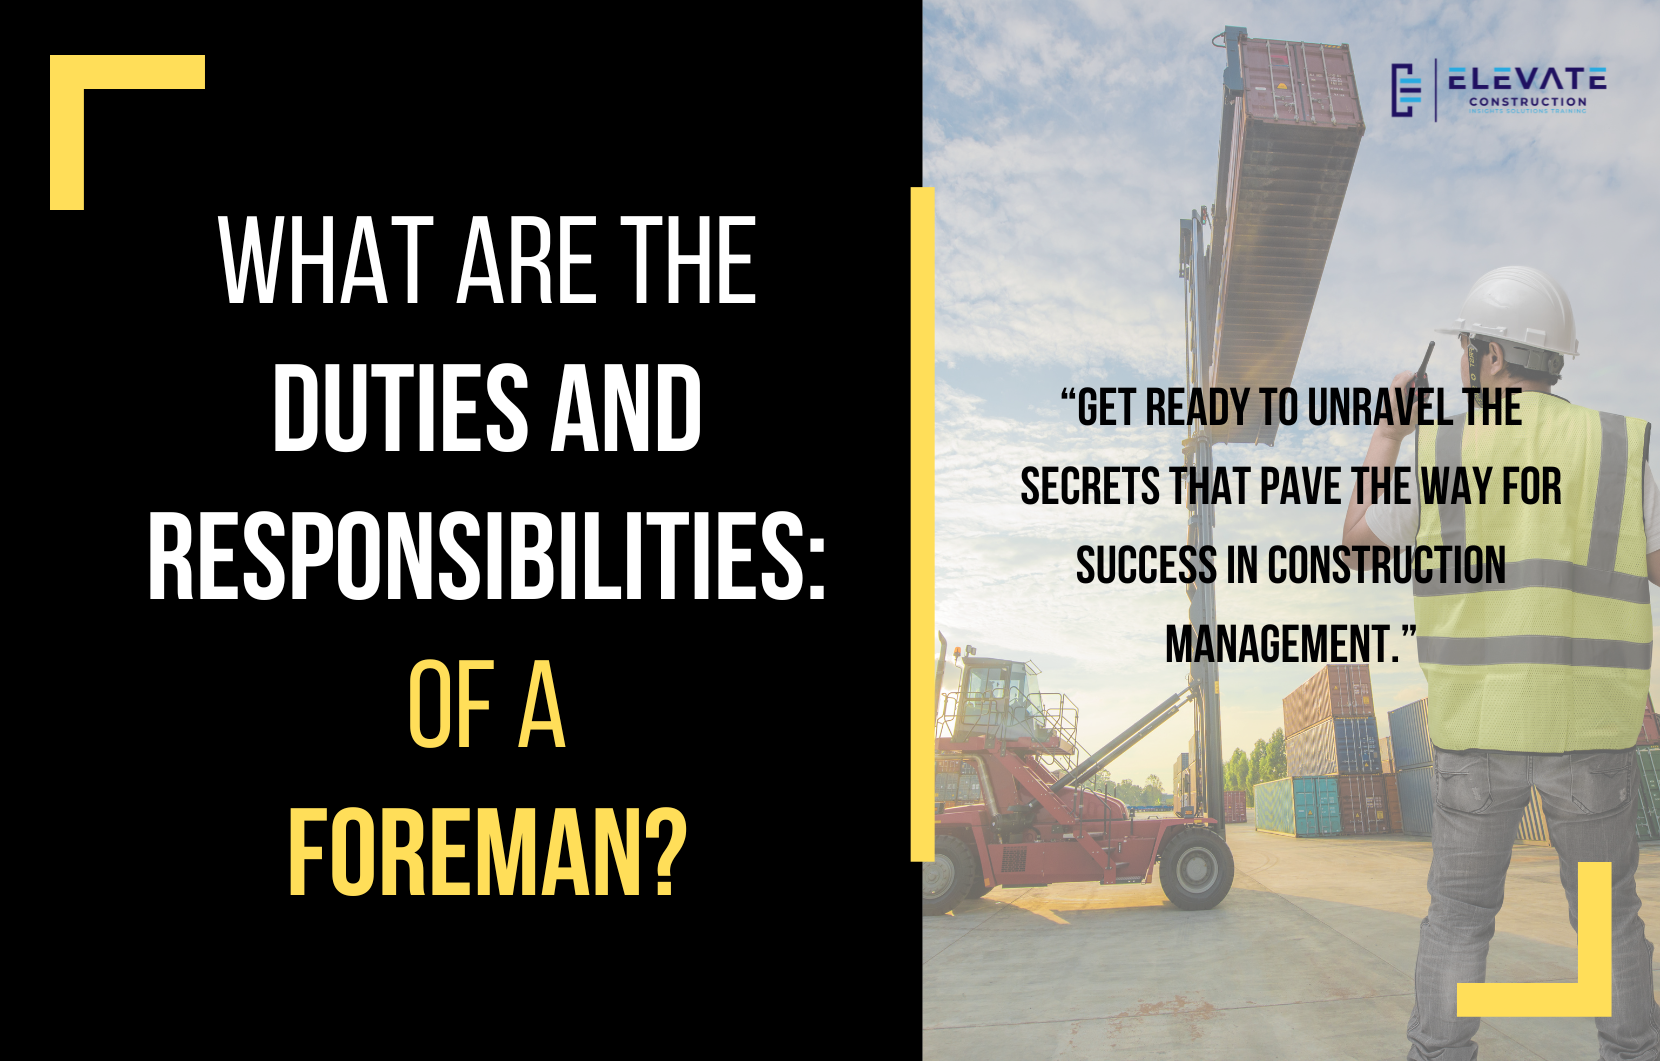 What Are The Duties And Responsibilities Of A Foreman?